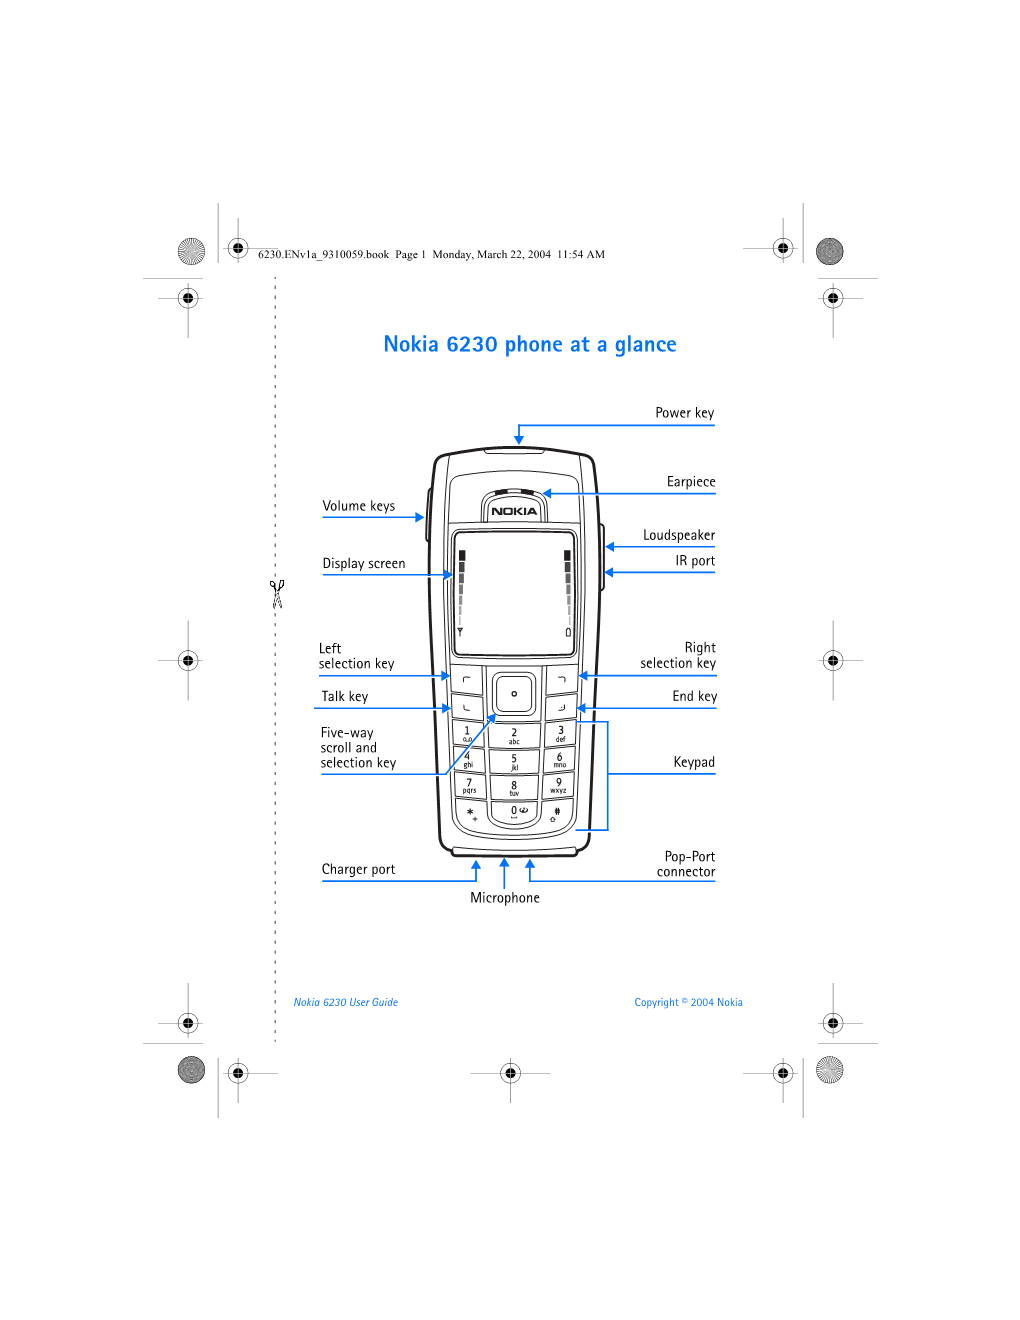 Nokia 6230 Phone at a Glance